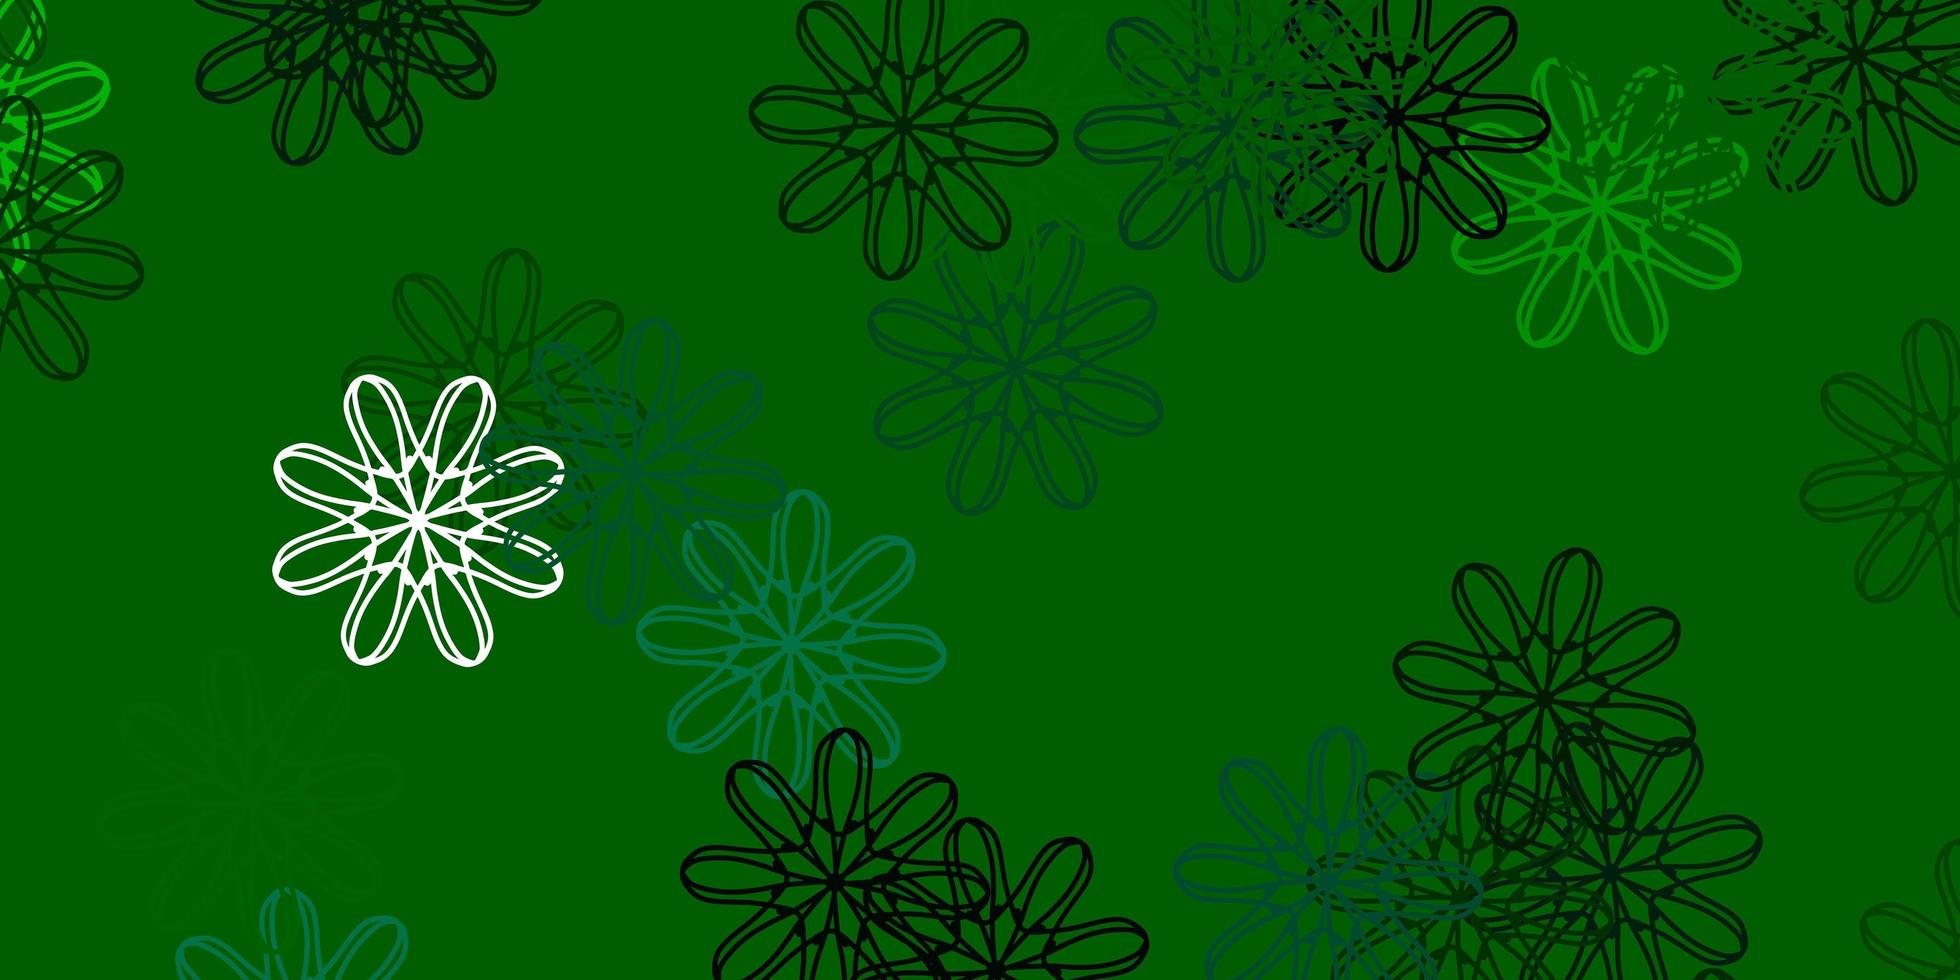 Light Green vector natural layout with flowers